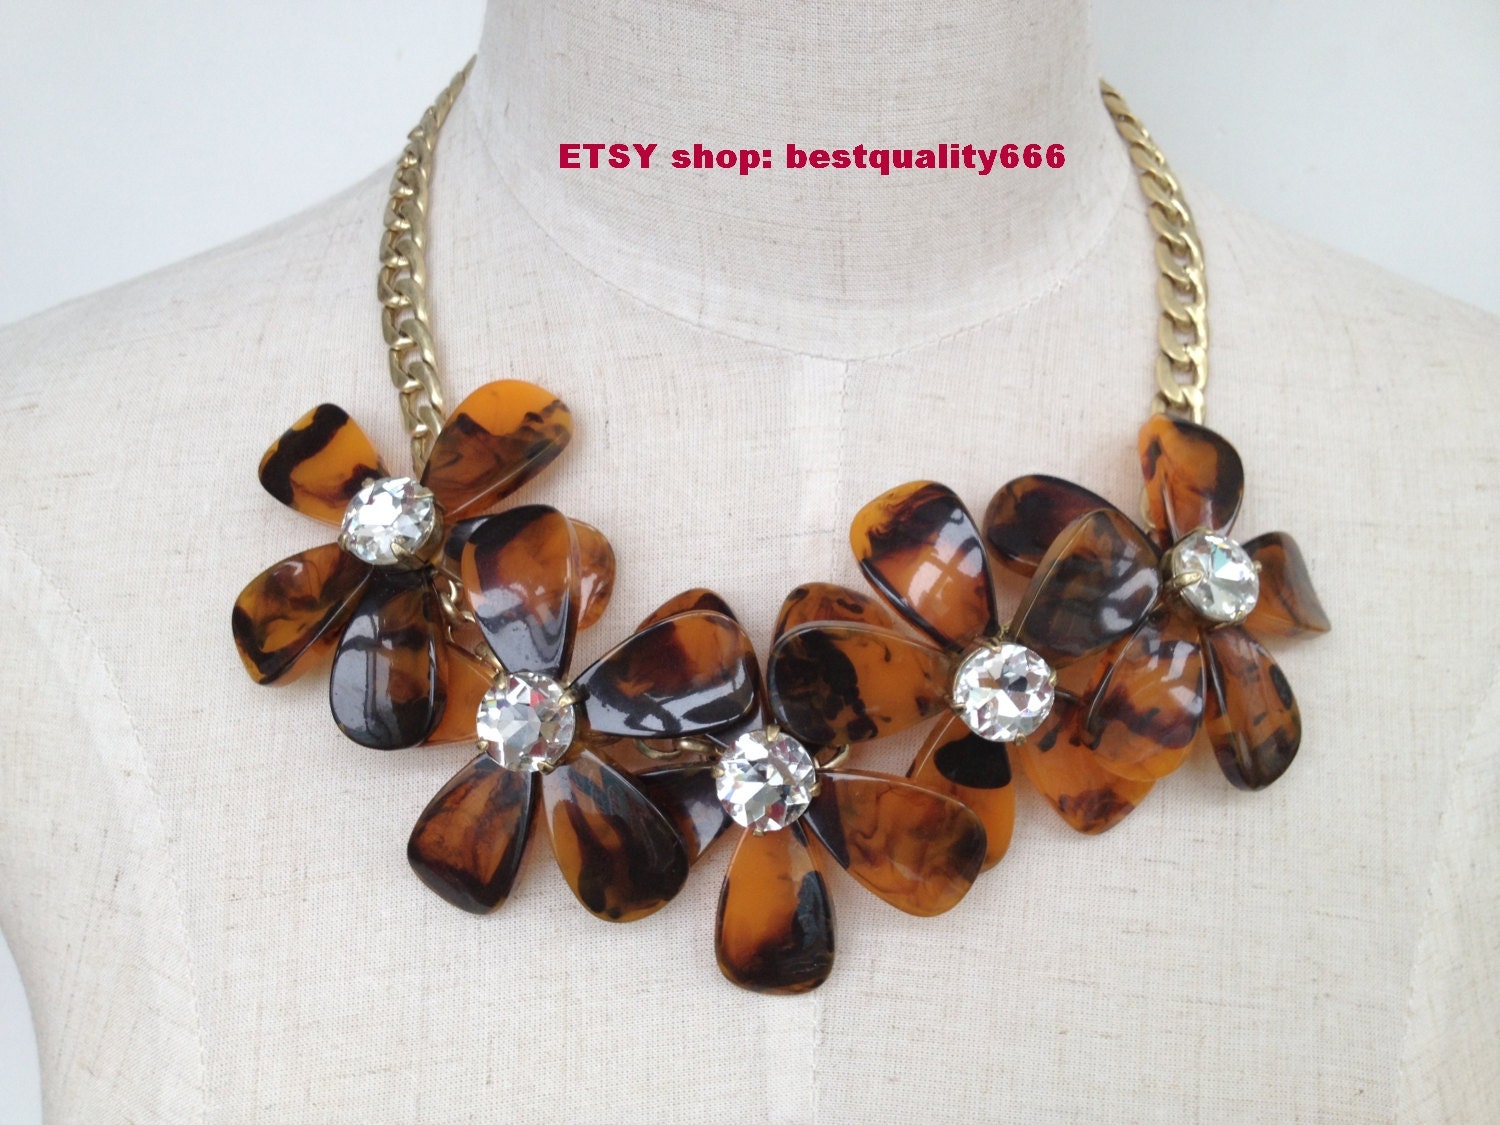 Exclusively 2013 TORTOISE FLOWER Crystal  GEM Stone Wedding Party Statement Beaded Bubble Bib  Necklace